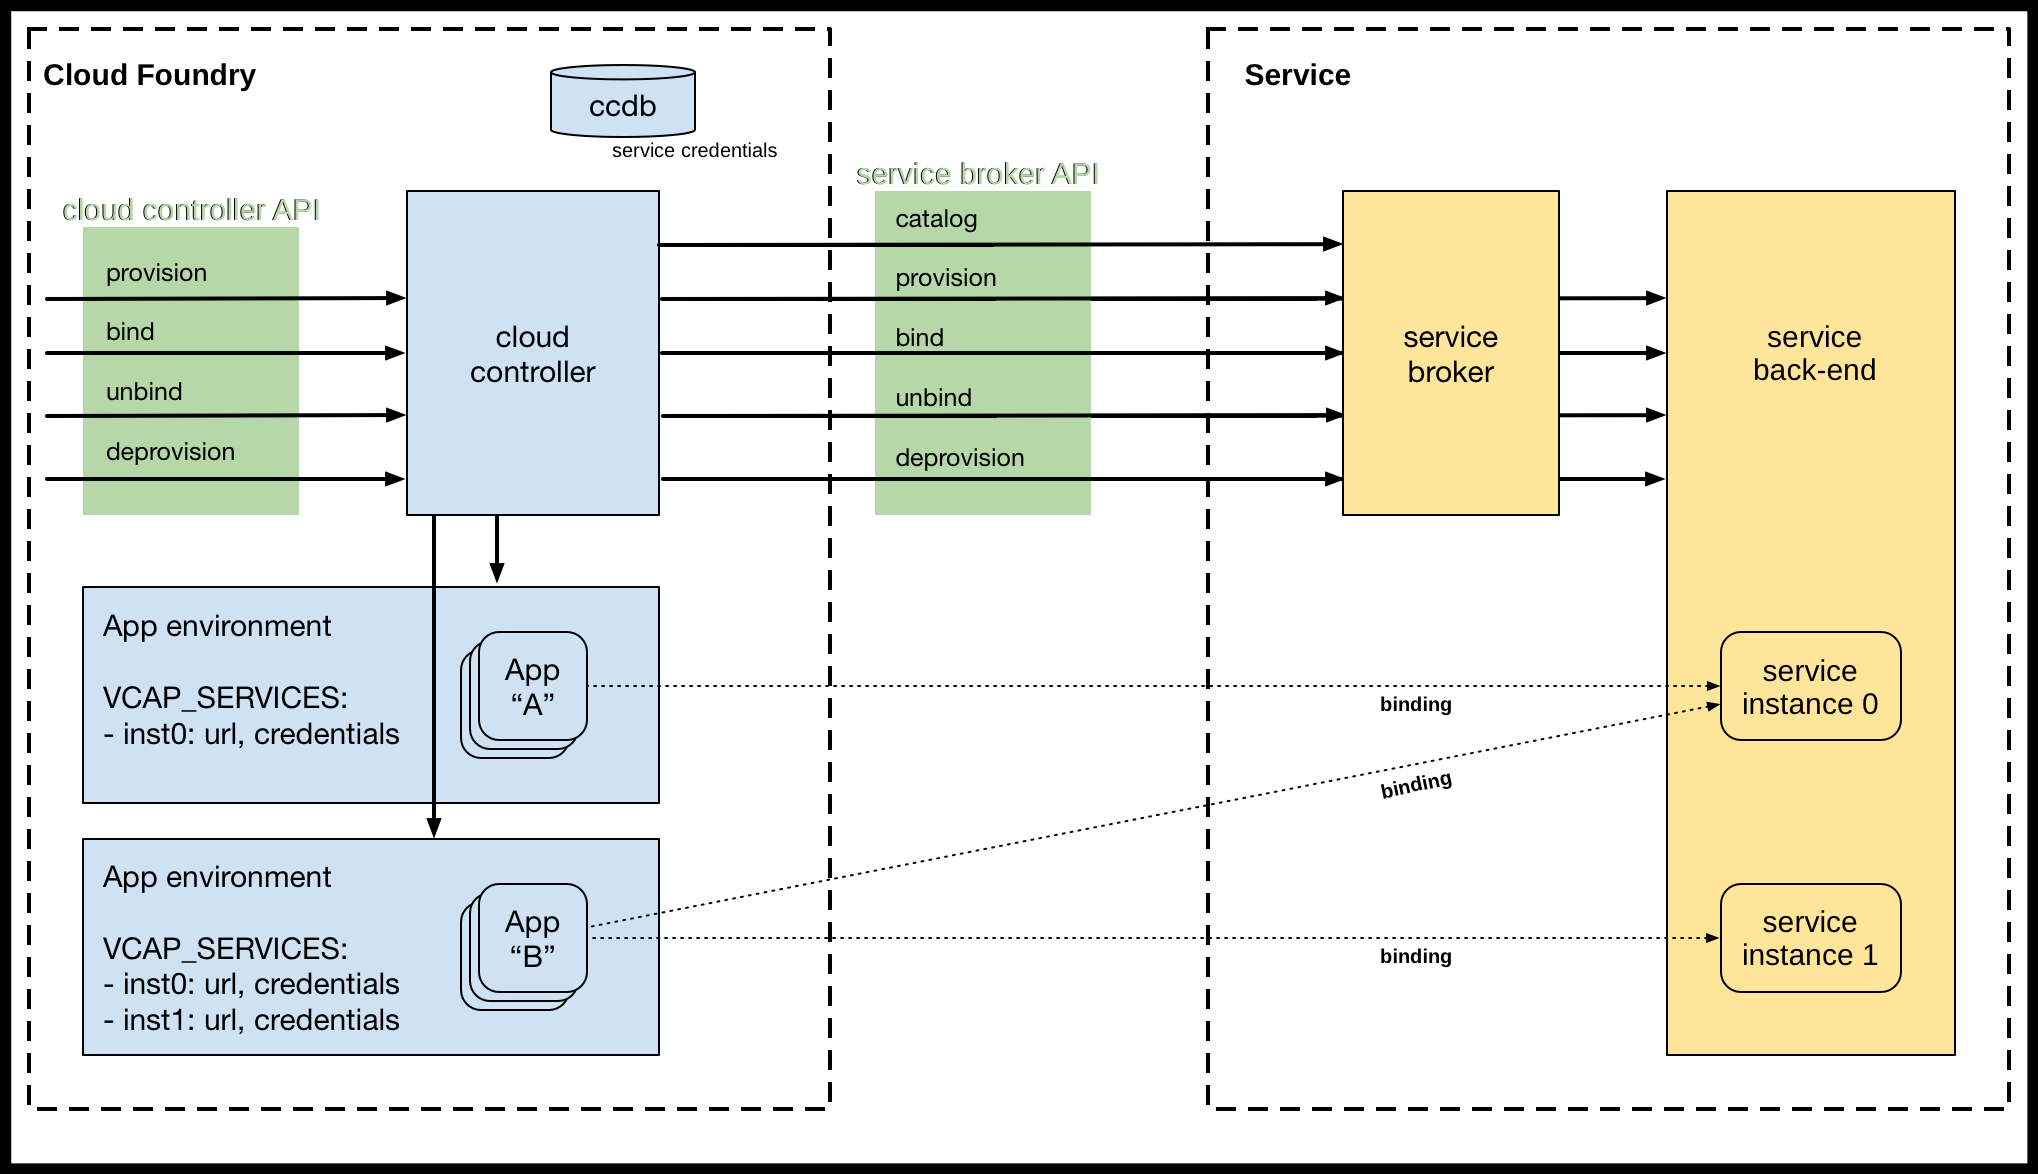 Services interact with the Cloud Foundry. The diagram shows the following components: 'Service Broker', 'cloud controller', 'App environment', and 'service instances.